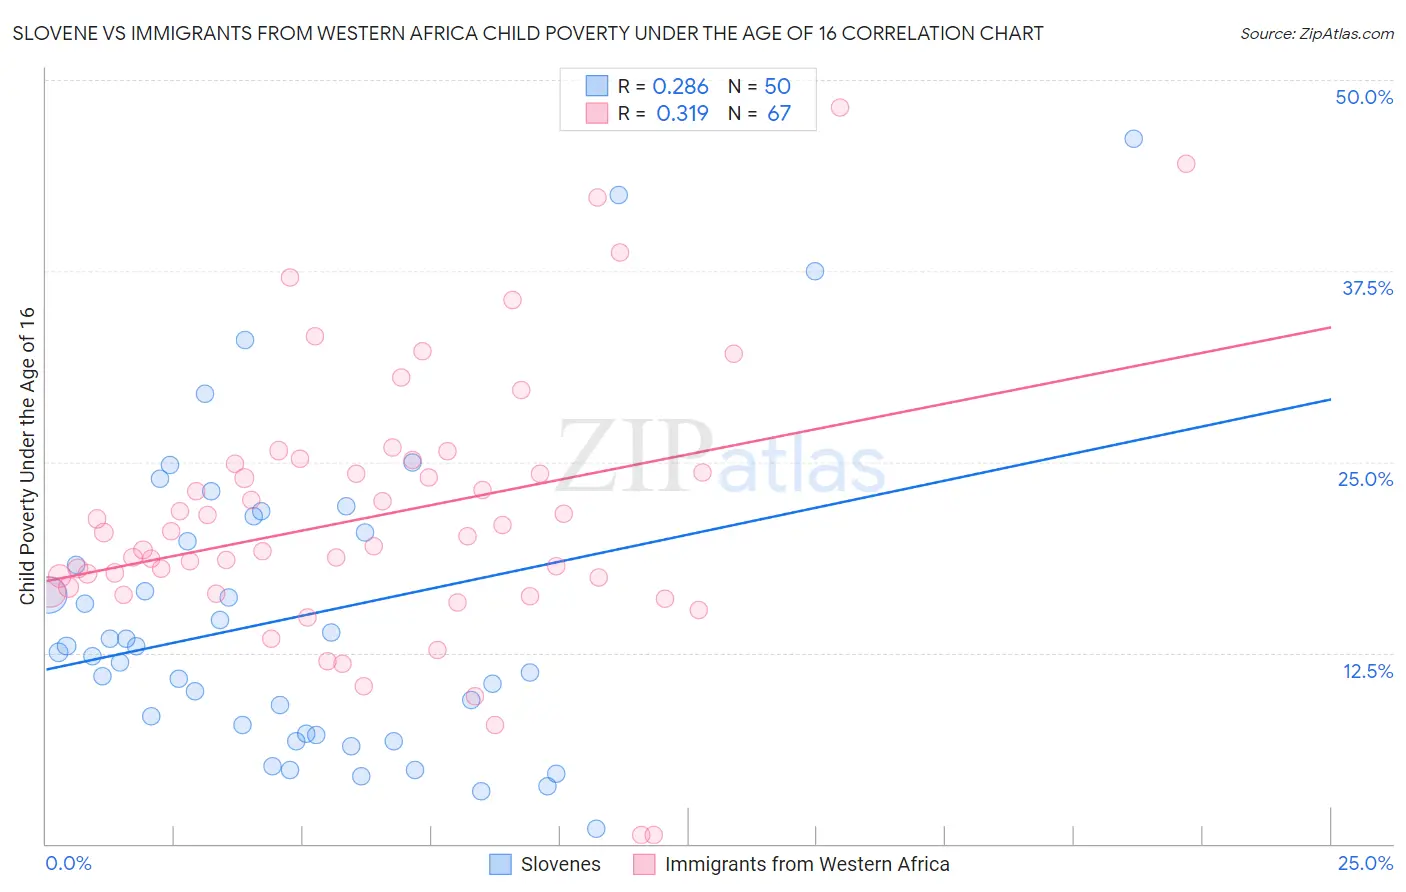 Slovene vs Immigrants from Western Africa Child Poverty Under the Age of 16